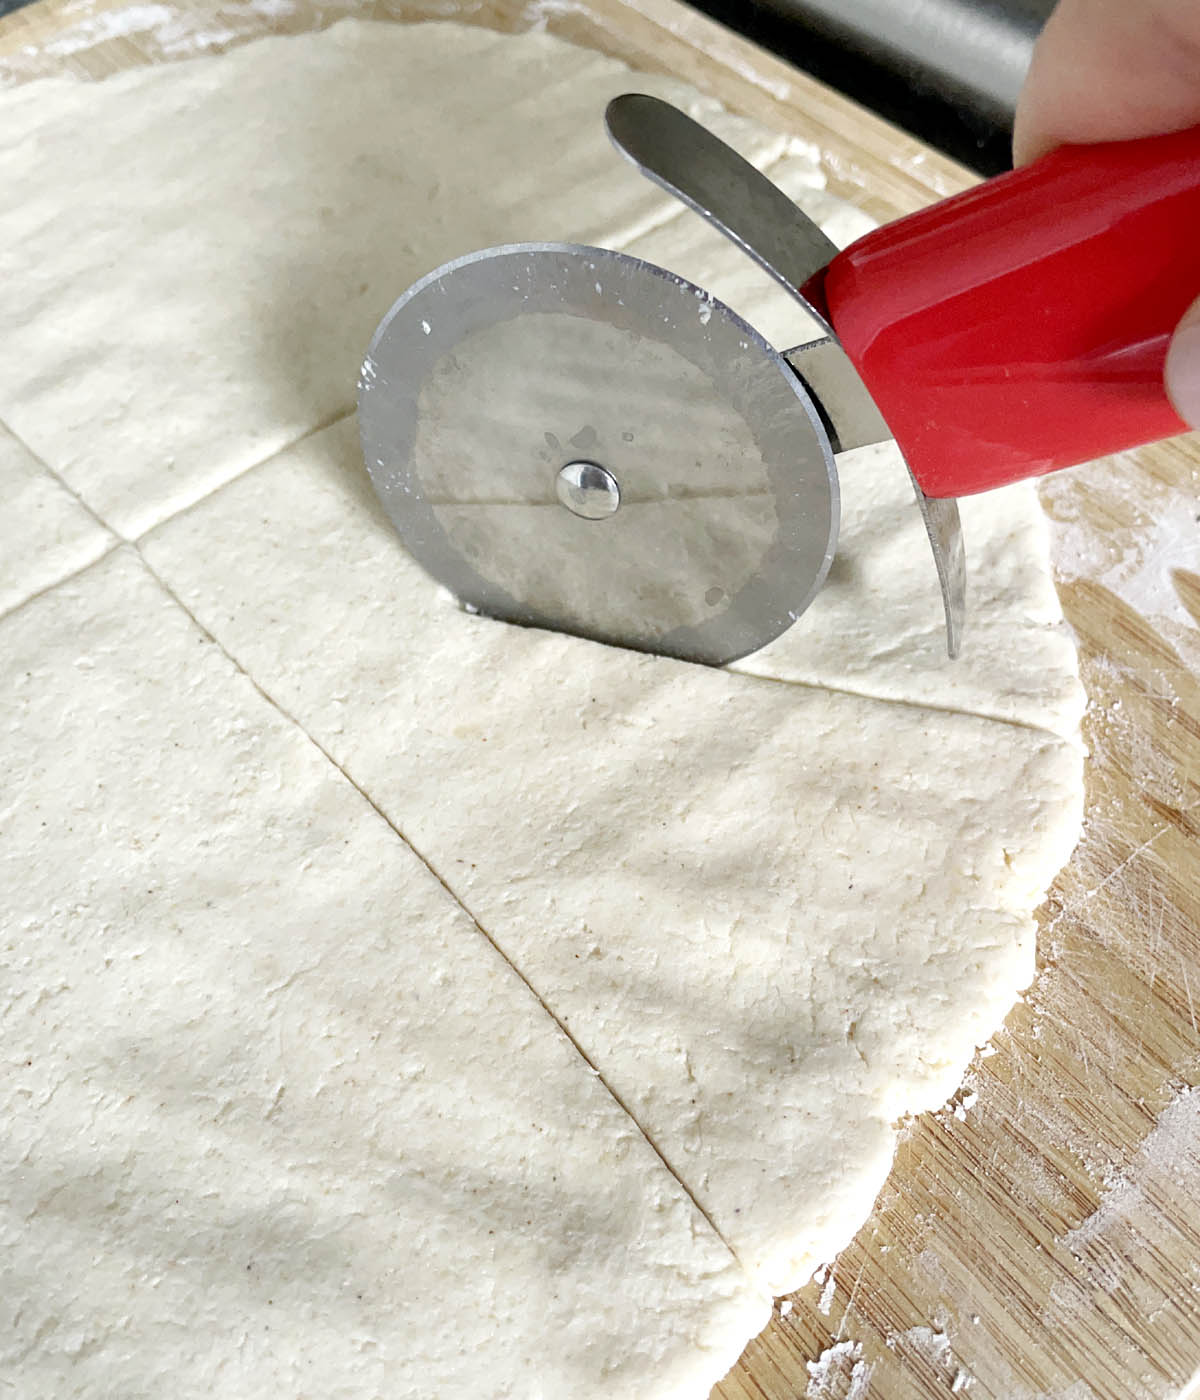 A pizza cutter cutting wedges into dough on wooden cutting board.